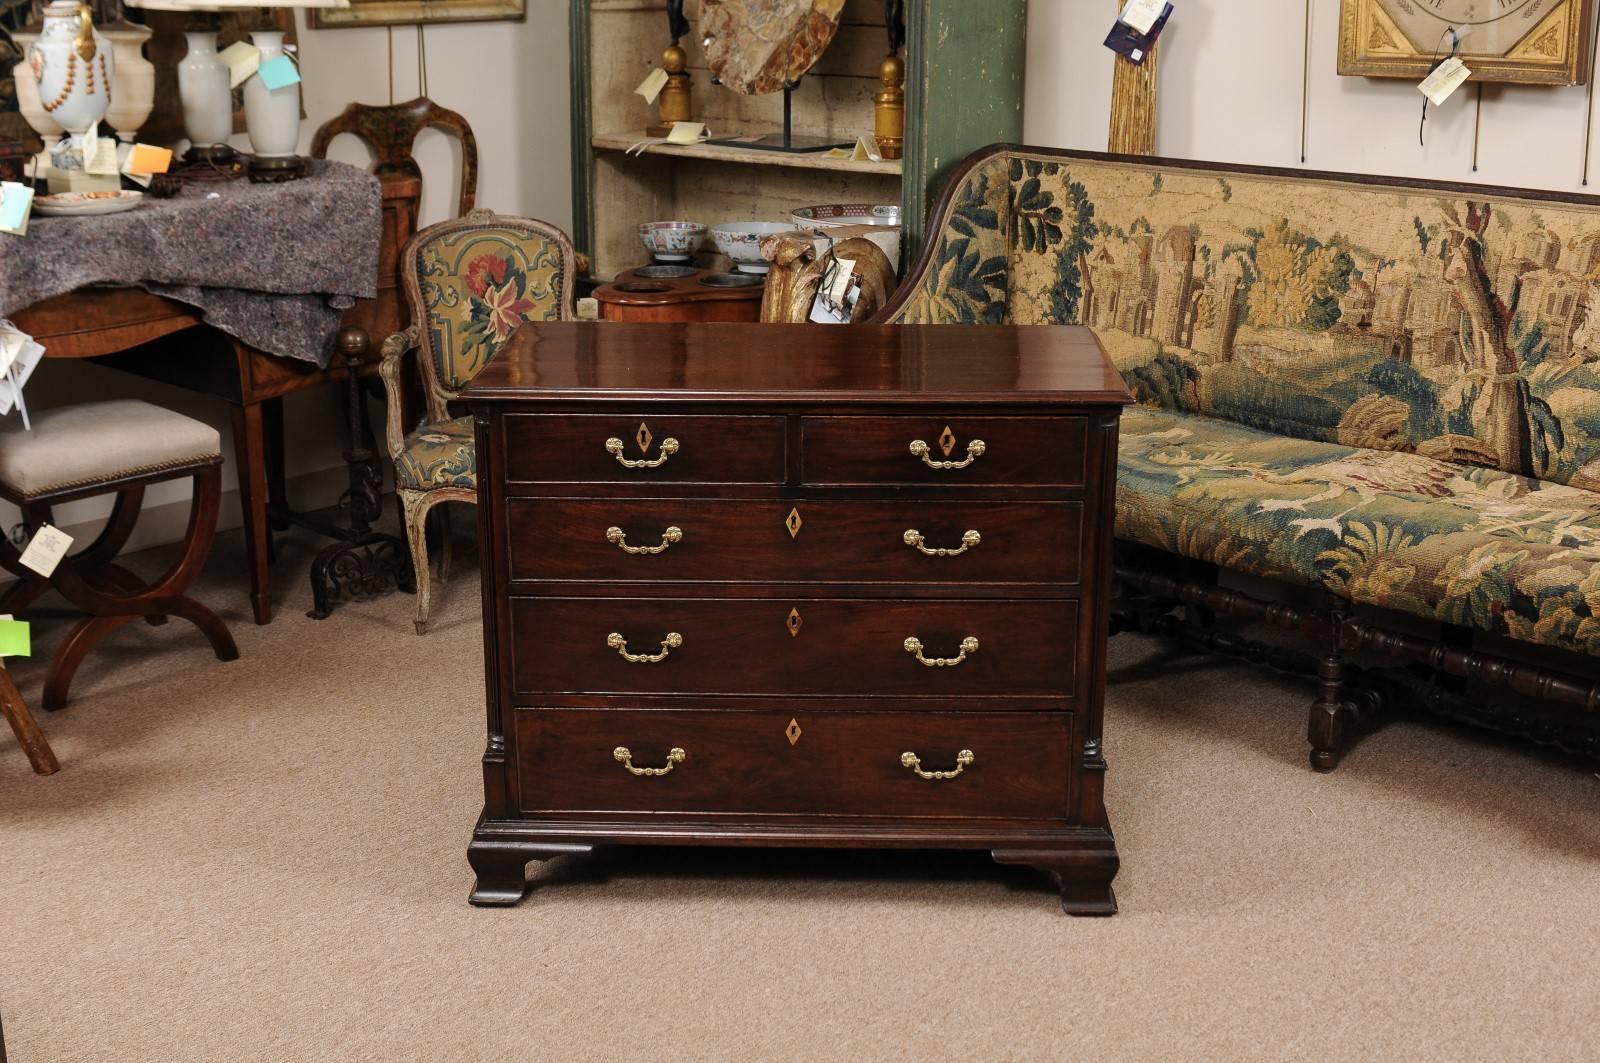 George III period chest in mahogany with five (5) drawers, reeded column detail, and ogee bracket feet, 18th century England.